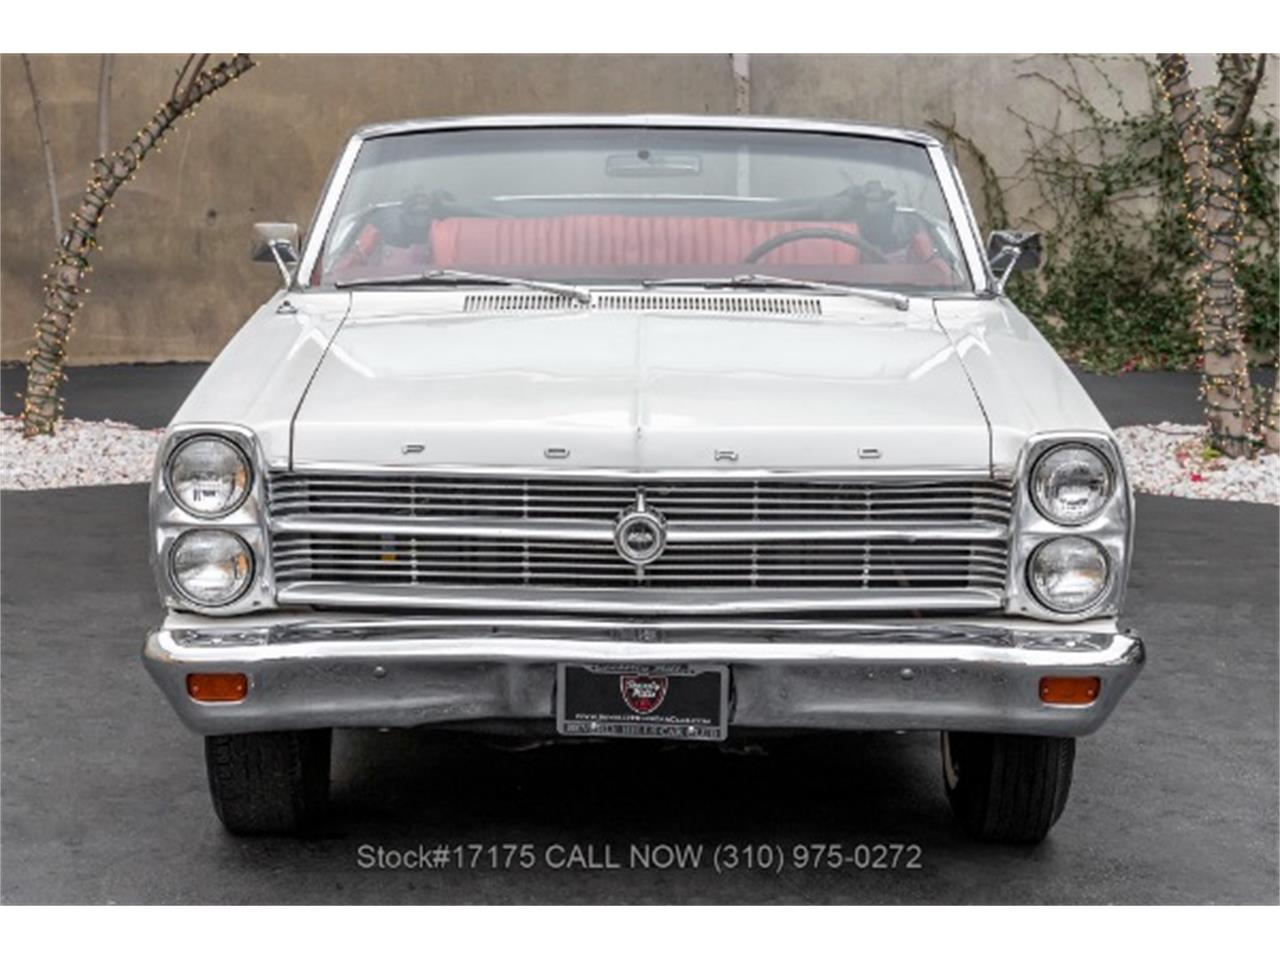 For Sale: 1966 Ford Fairlane 500 in Beverly Hills, California for sale in Beverly Hills, CA